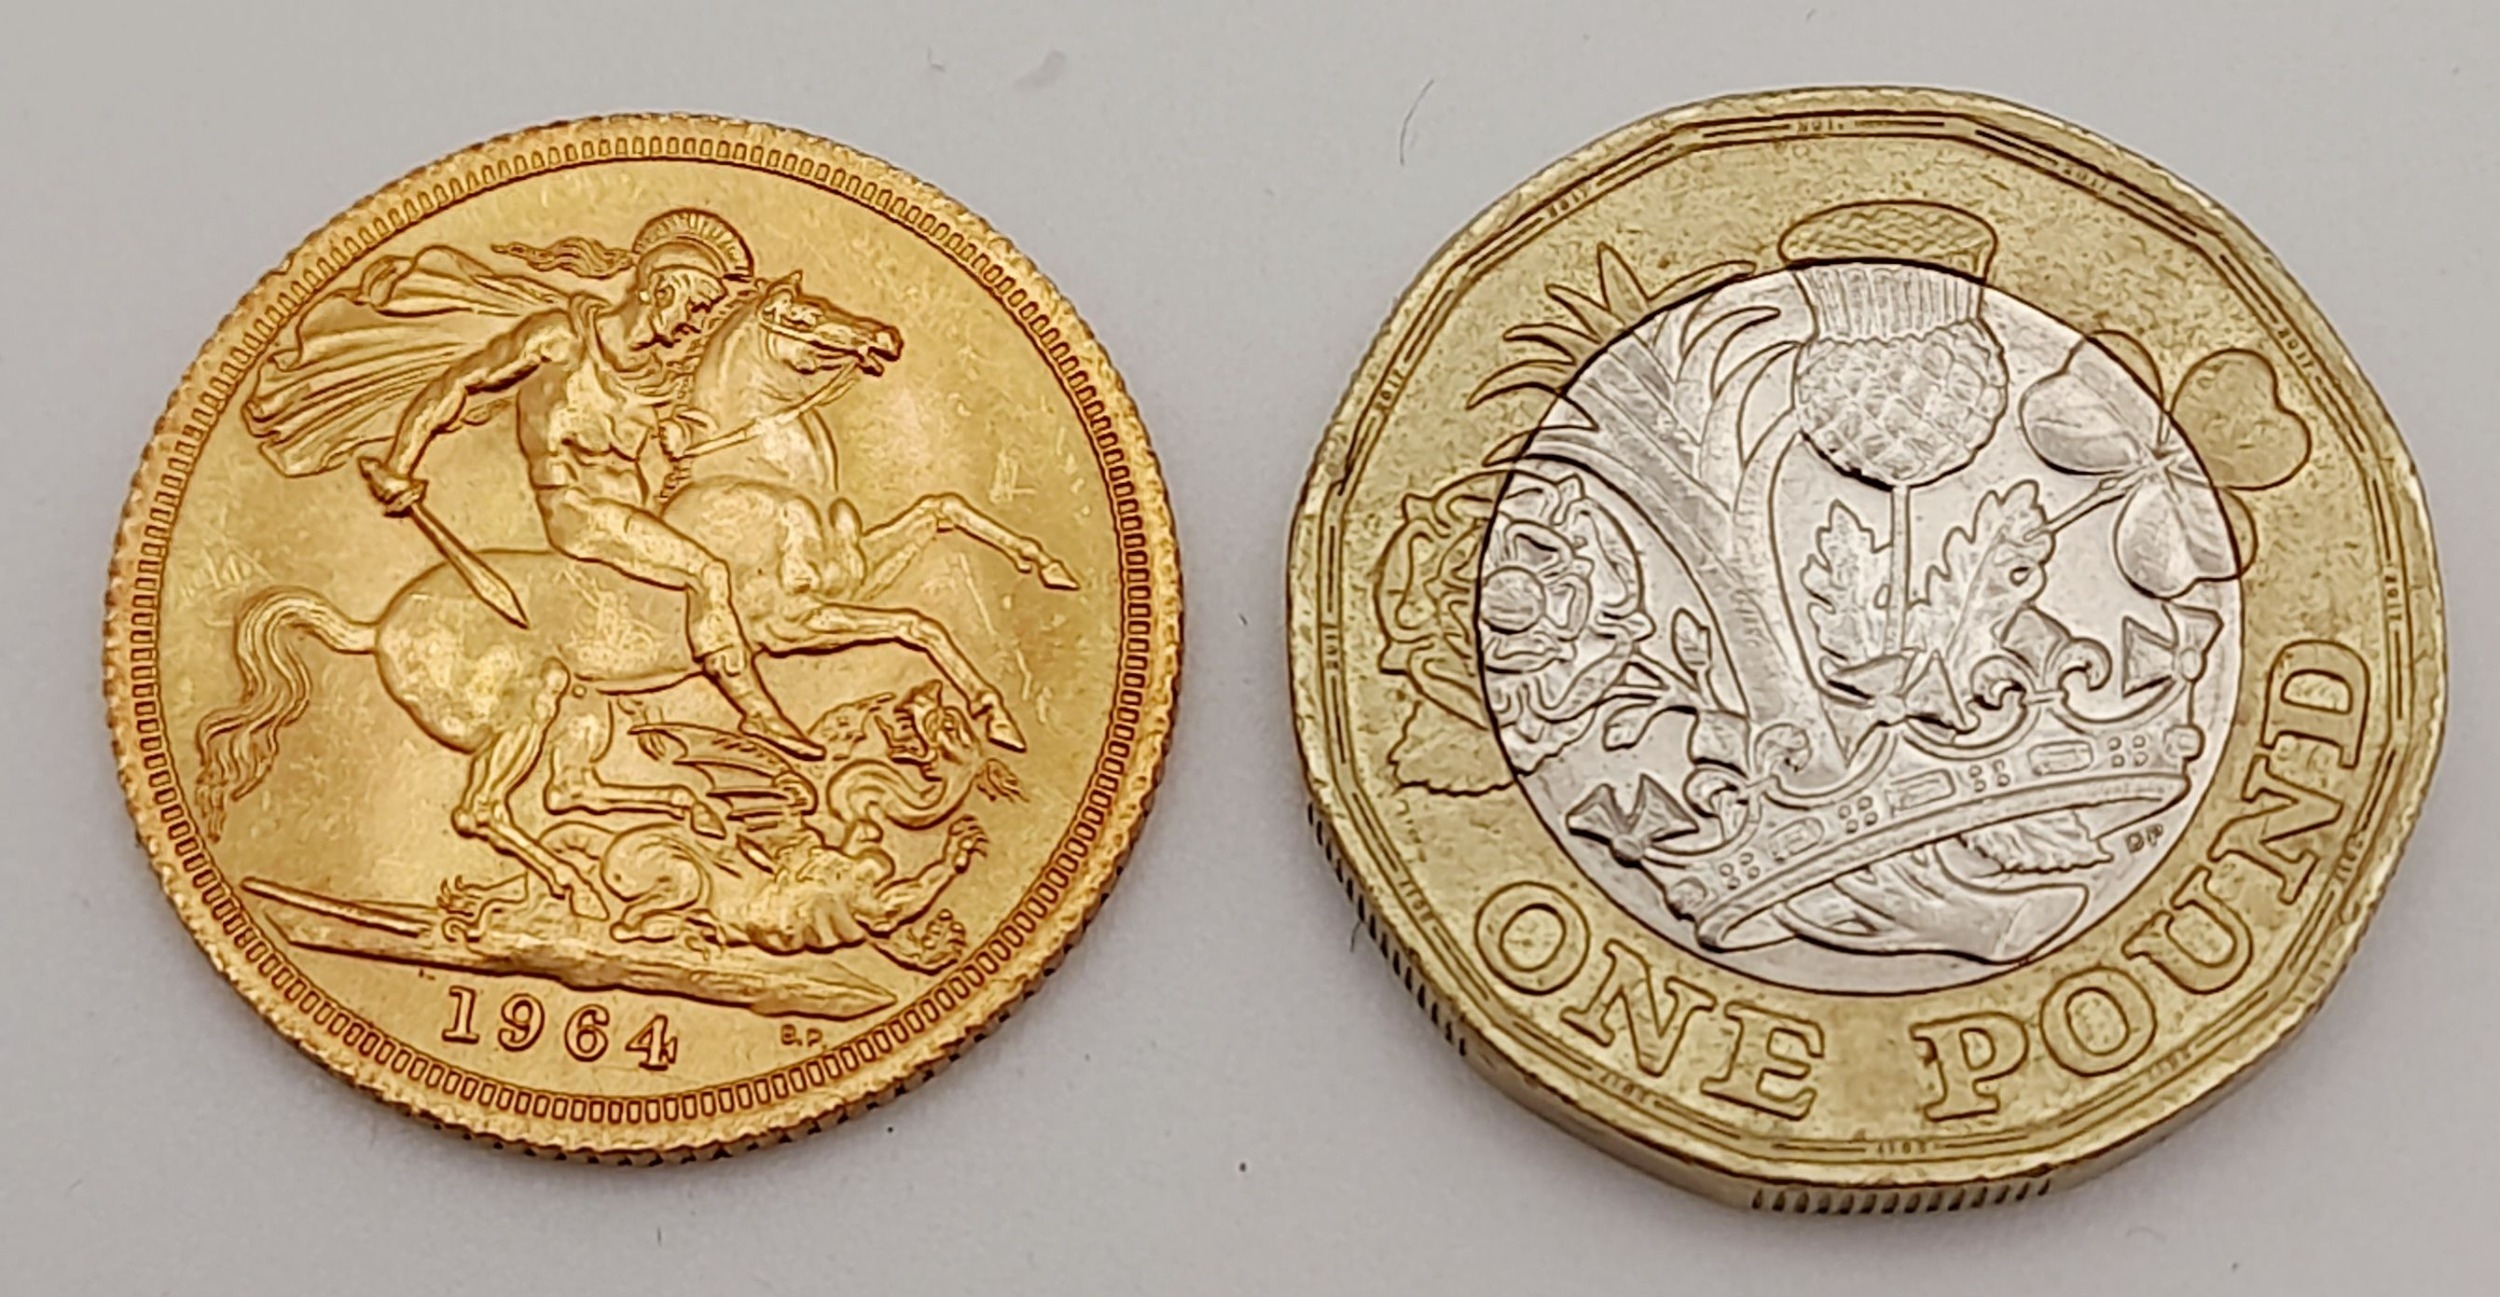 A 1964 22K Gold Queen Elizabeth II Full Sovereign Coin. - Image 4 of 4